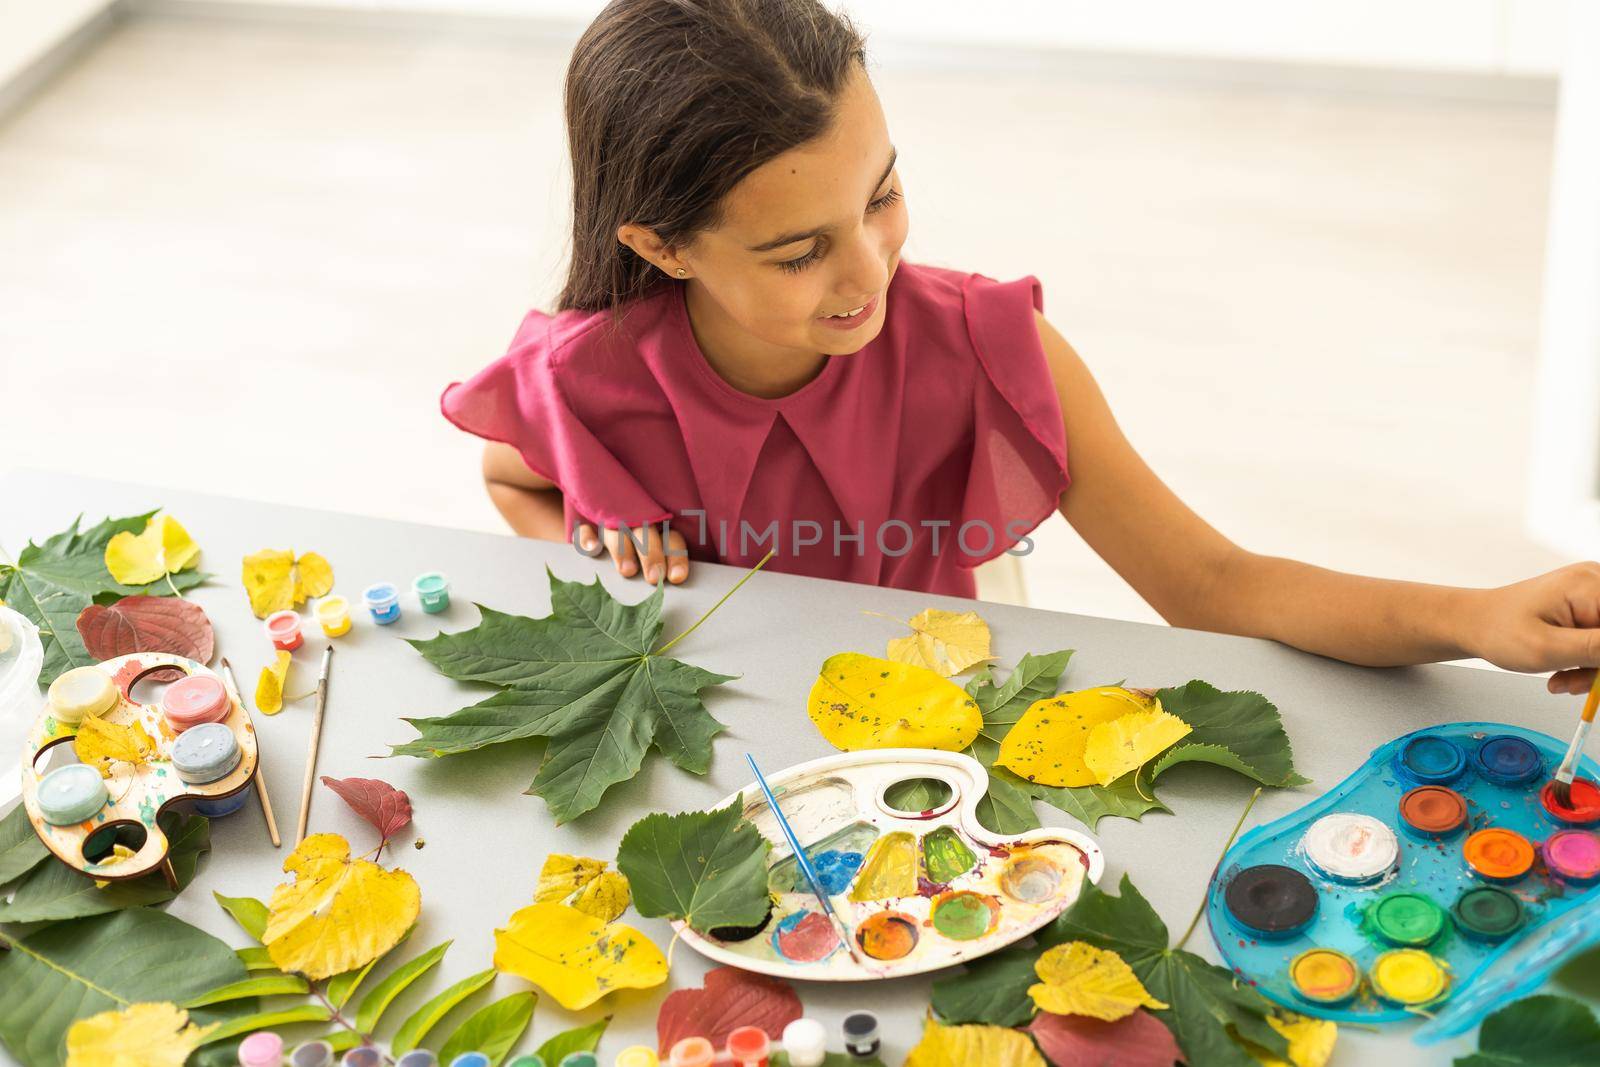 little girl artist with a brush and paints in her hands in autumn idraws a landscape with leaves on canvas by Andelov13